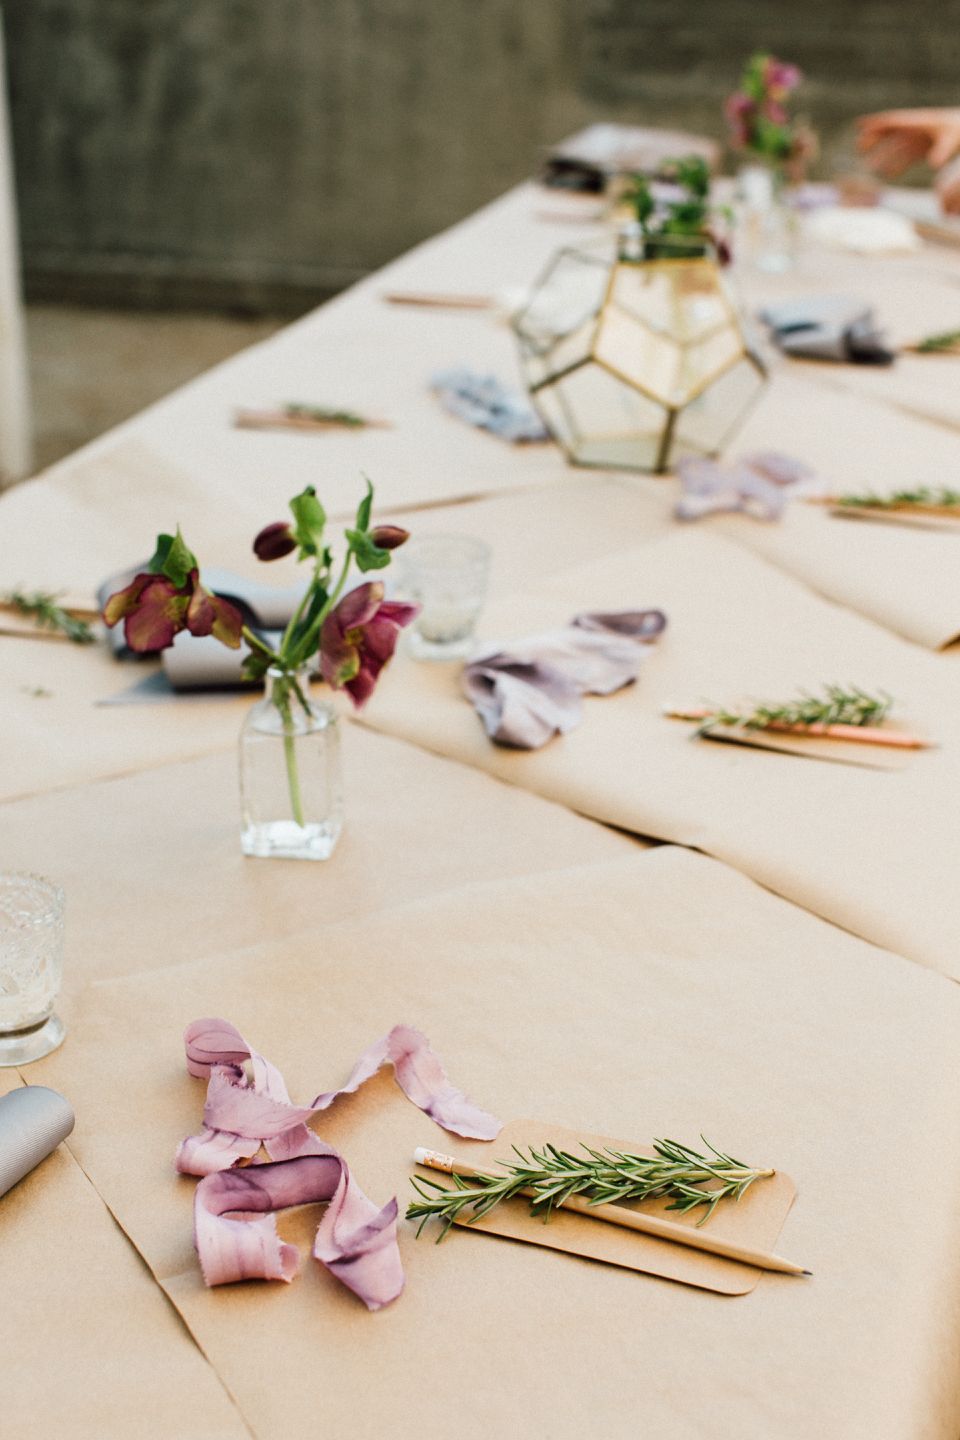 Romantic Table Setting Ideas at Home 2022